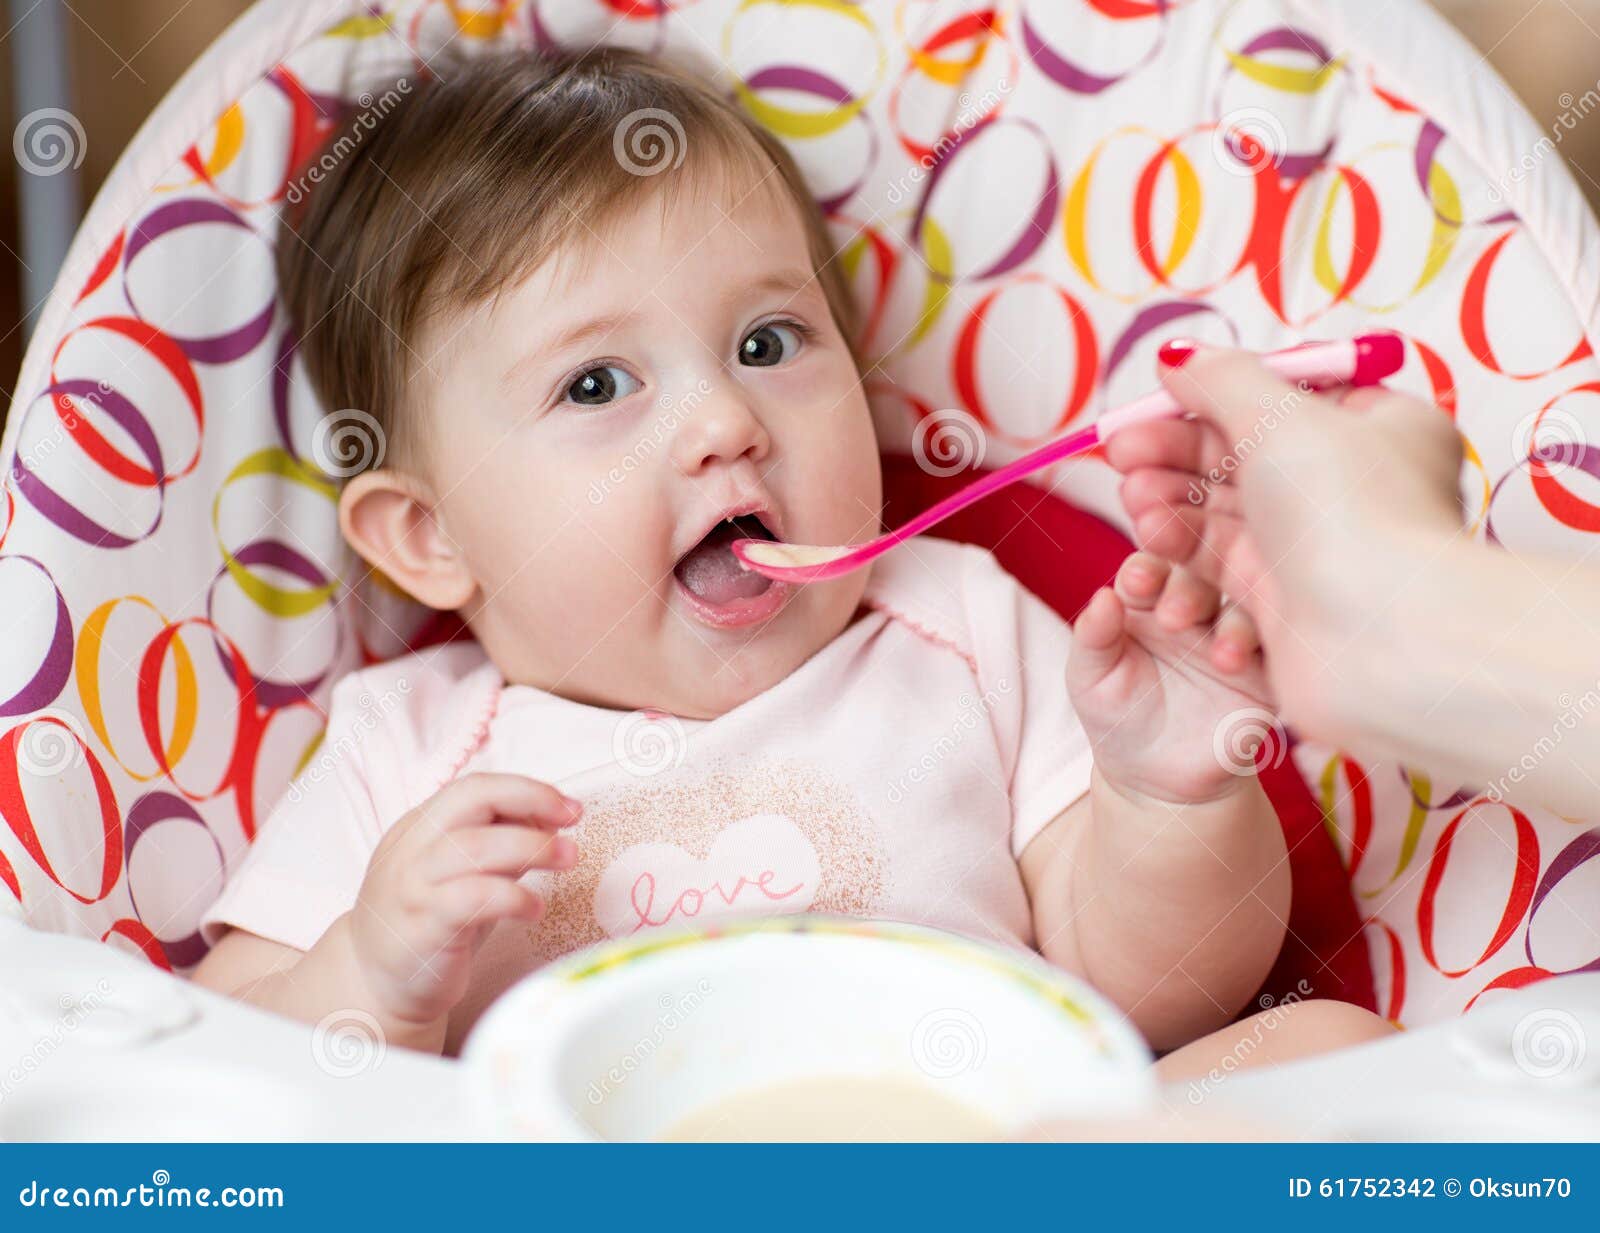 Baby Kid Girl Eating Food with Mother Help Stock Photo - Image of